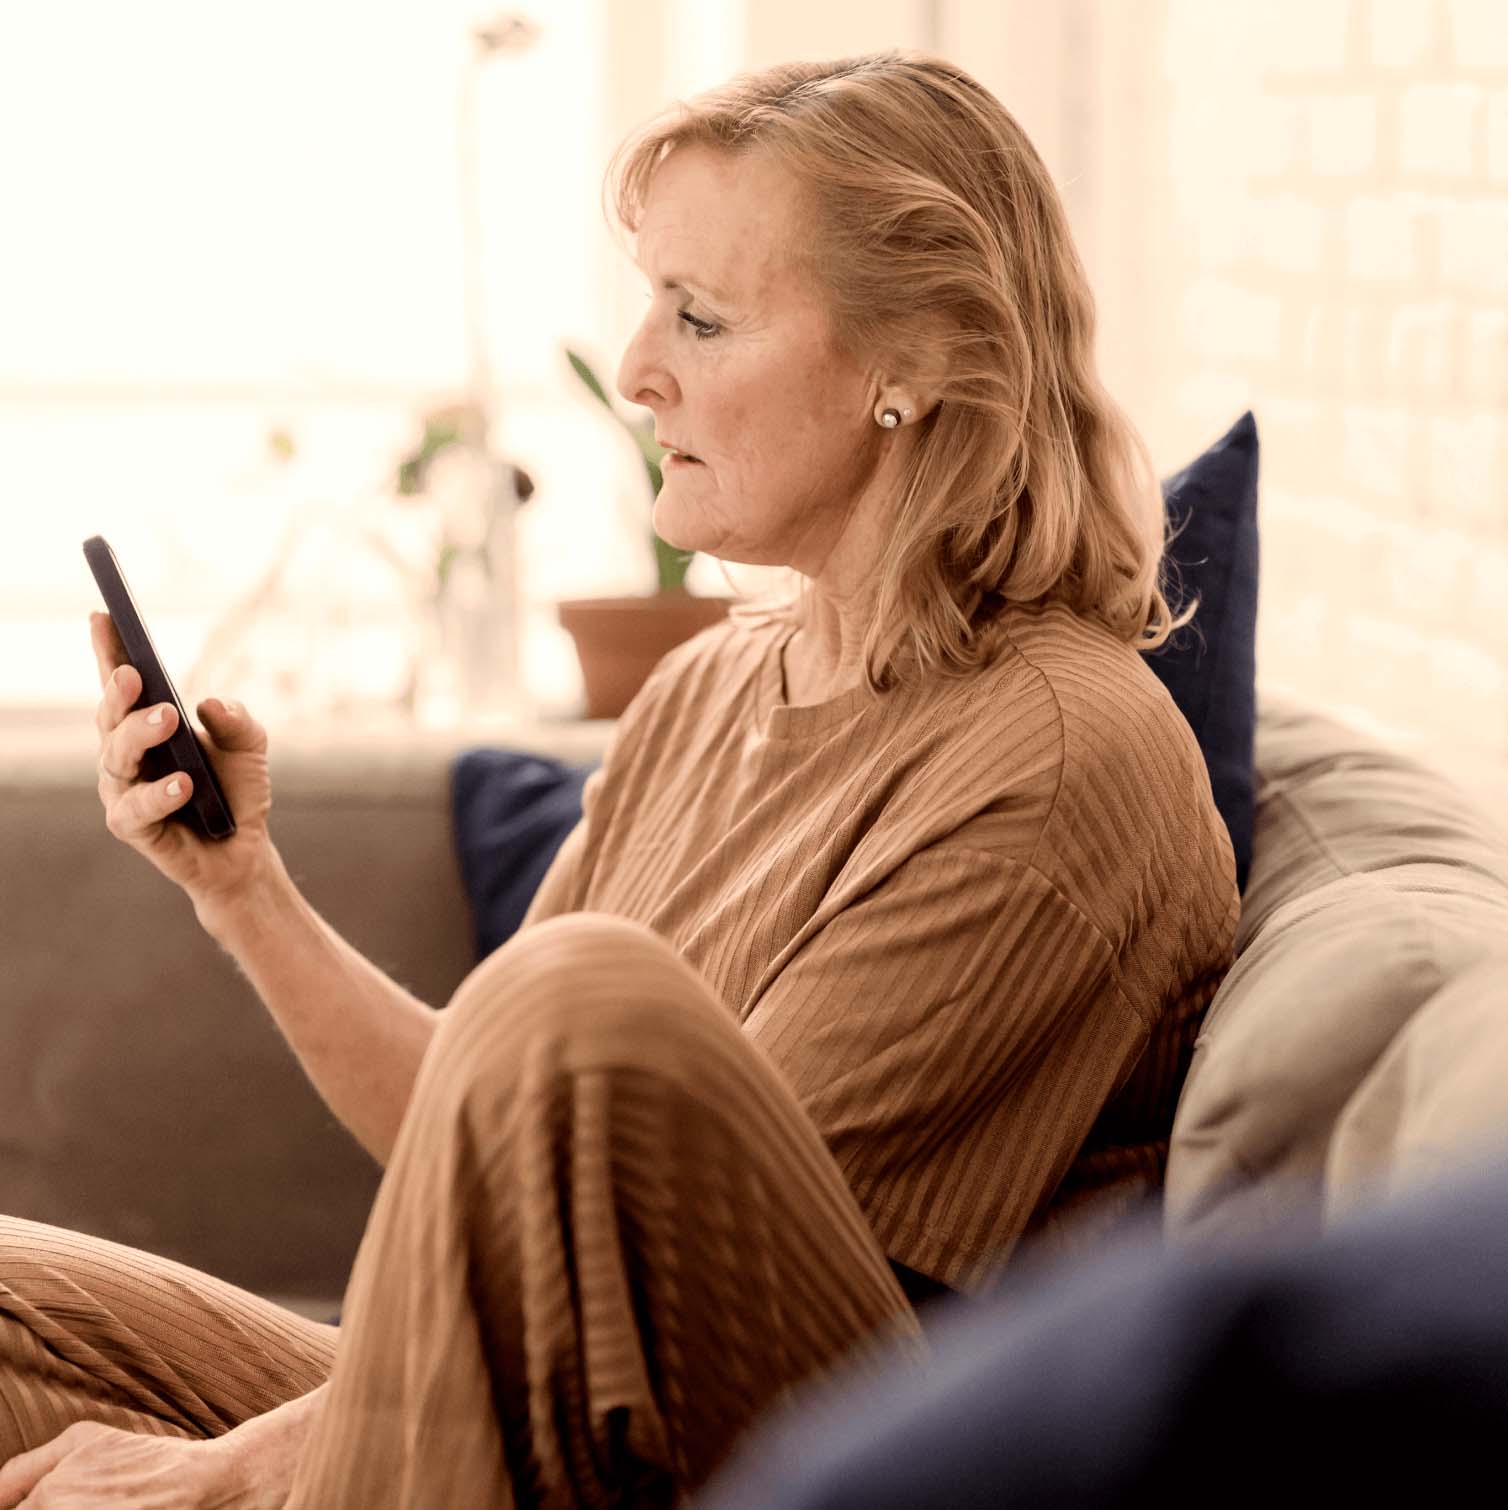 A senior woman sitting on a couch, looking at her smartphone.